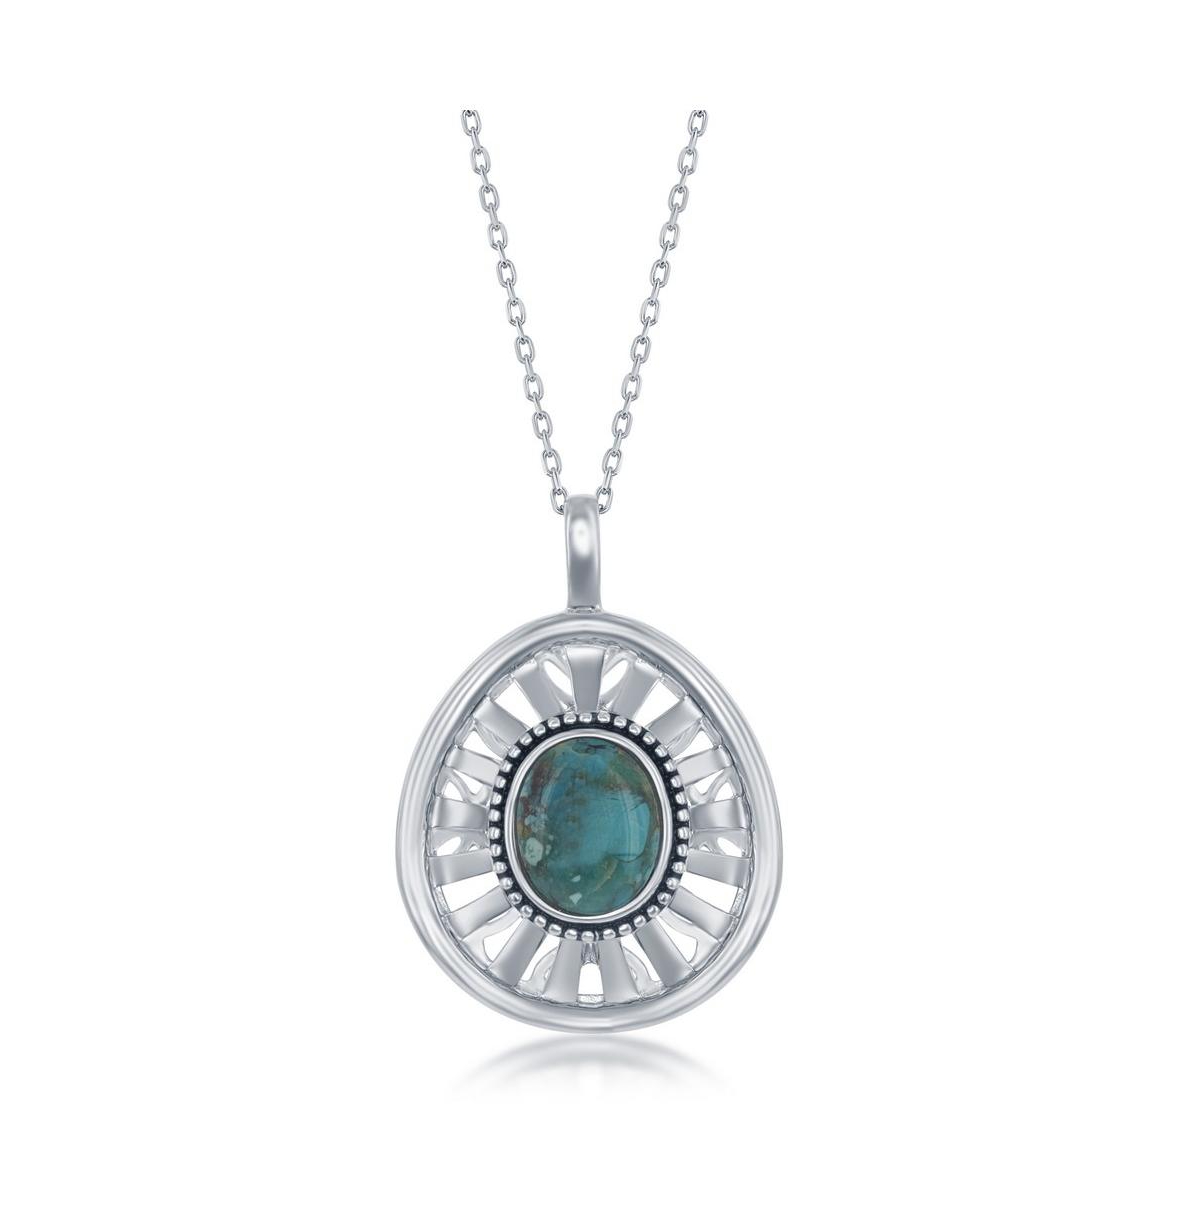 Sterling Silver Oval Turquoise, Oxidized Pendant - Turquoise/aqua